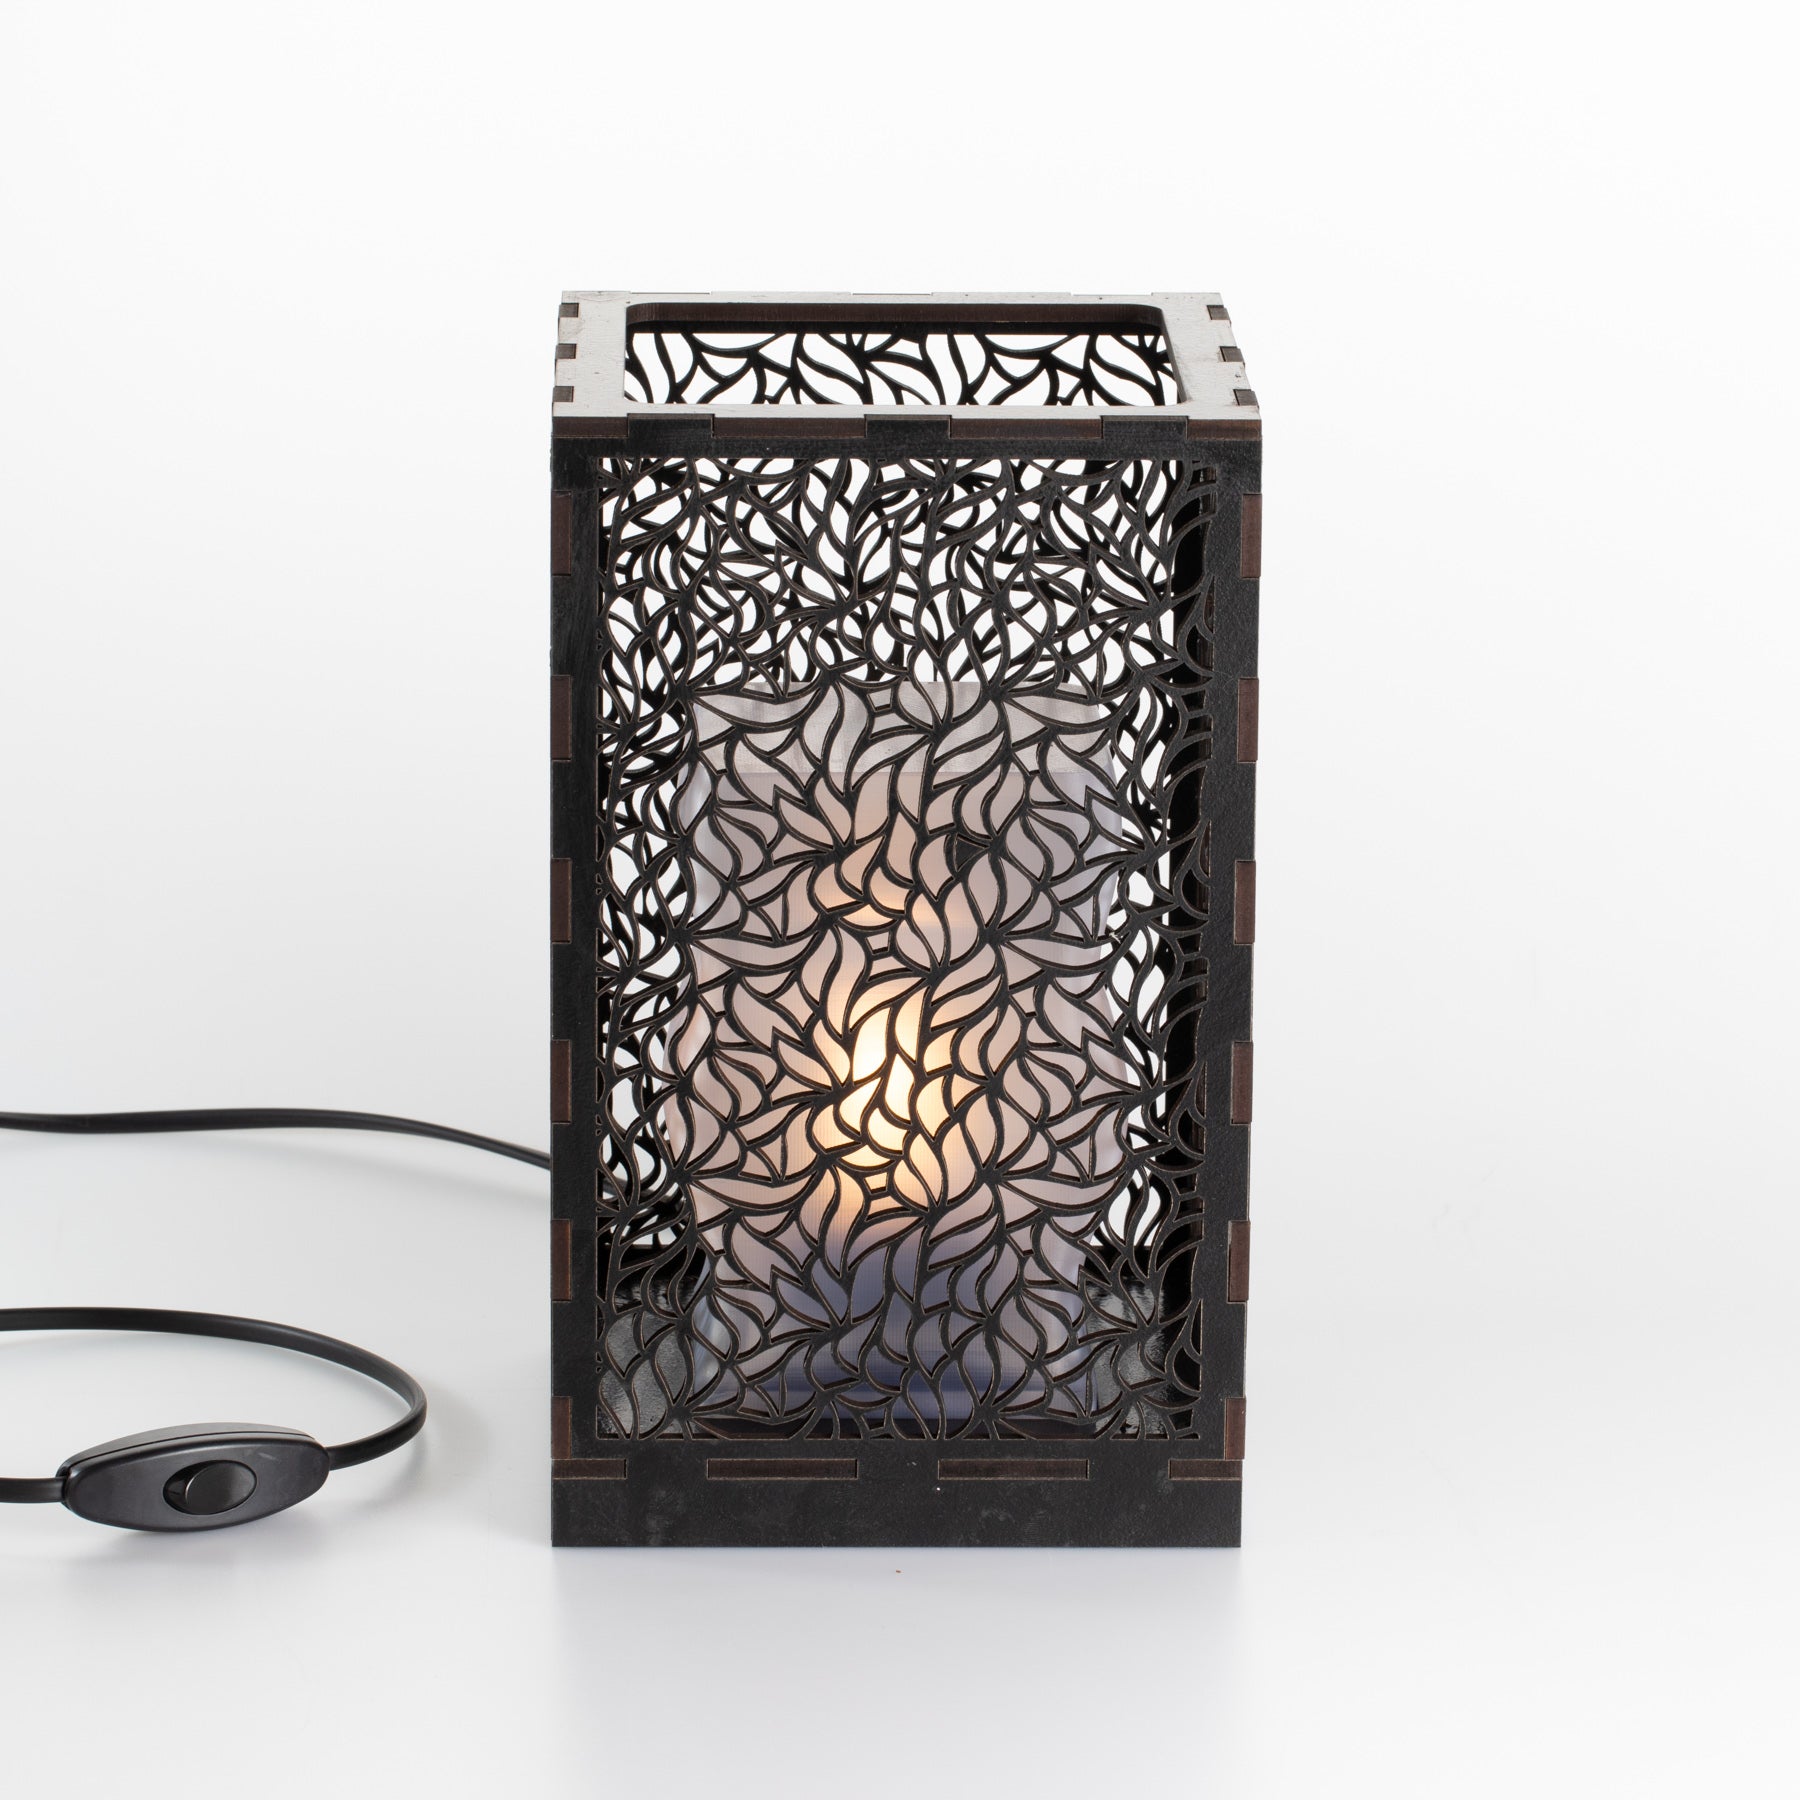 Sweet Home Trends® Box Lamp with Flying Leaves Pattern